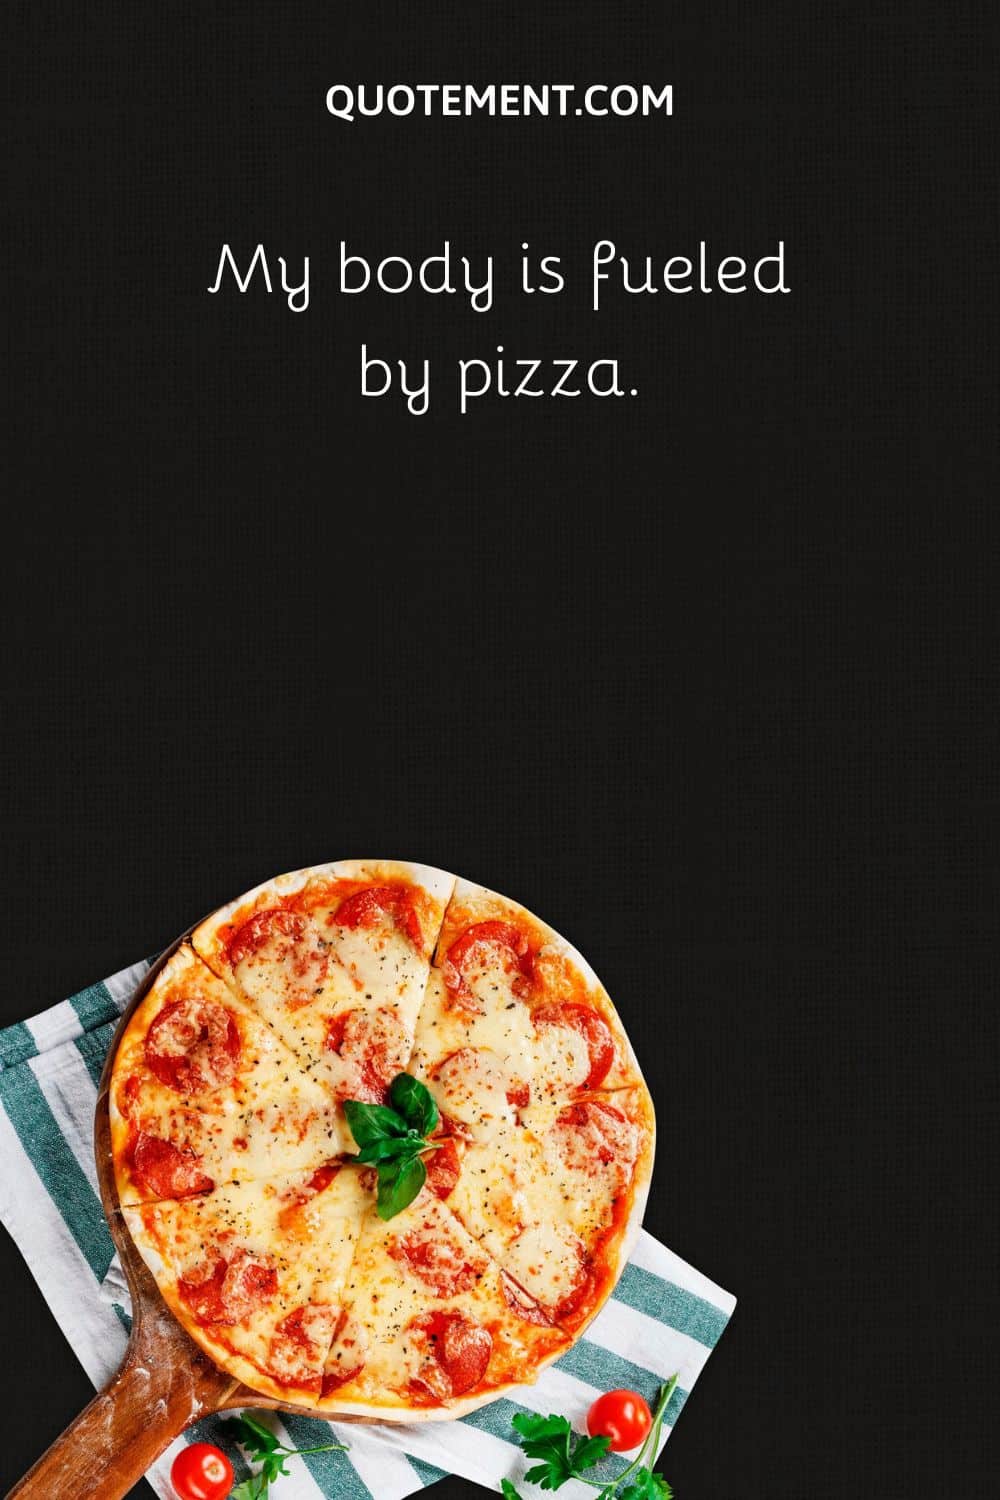 My body is fueled by pizza